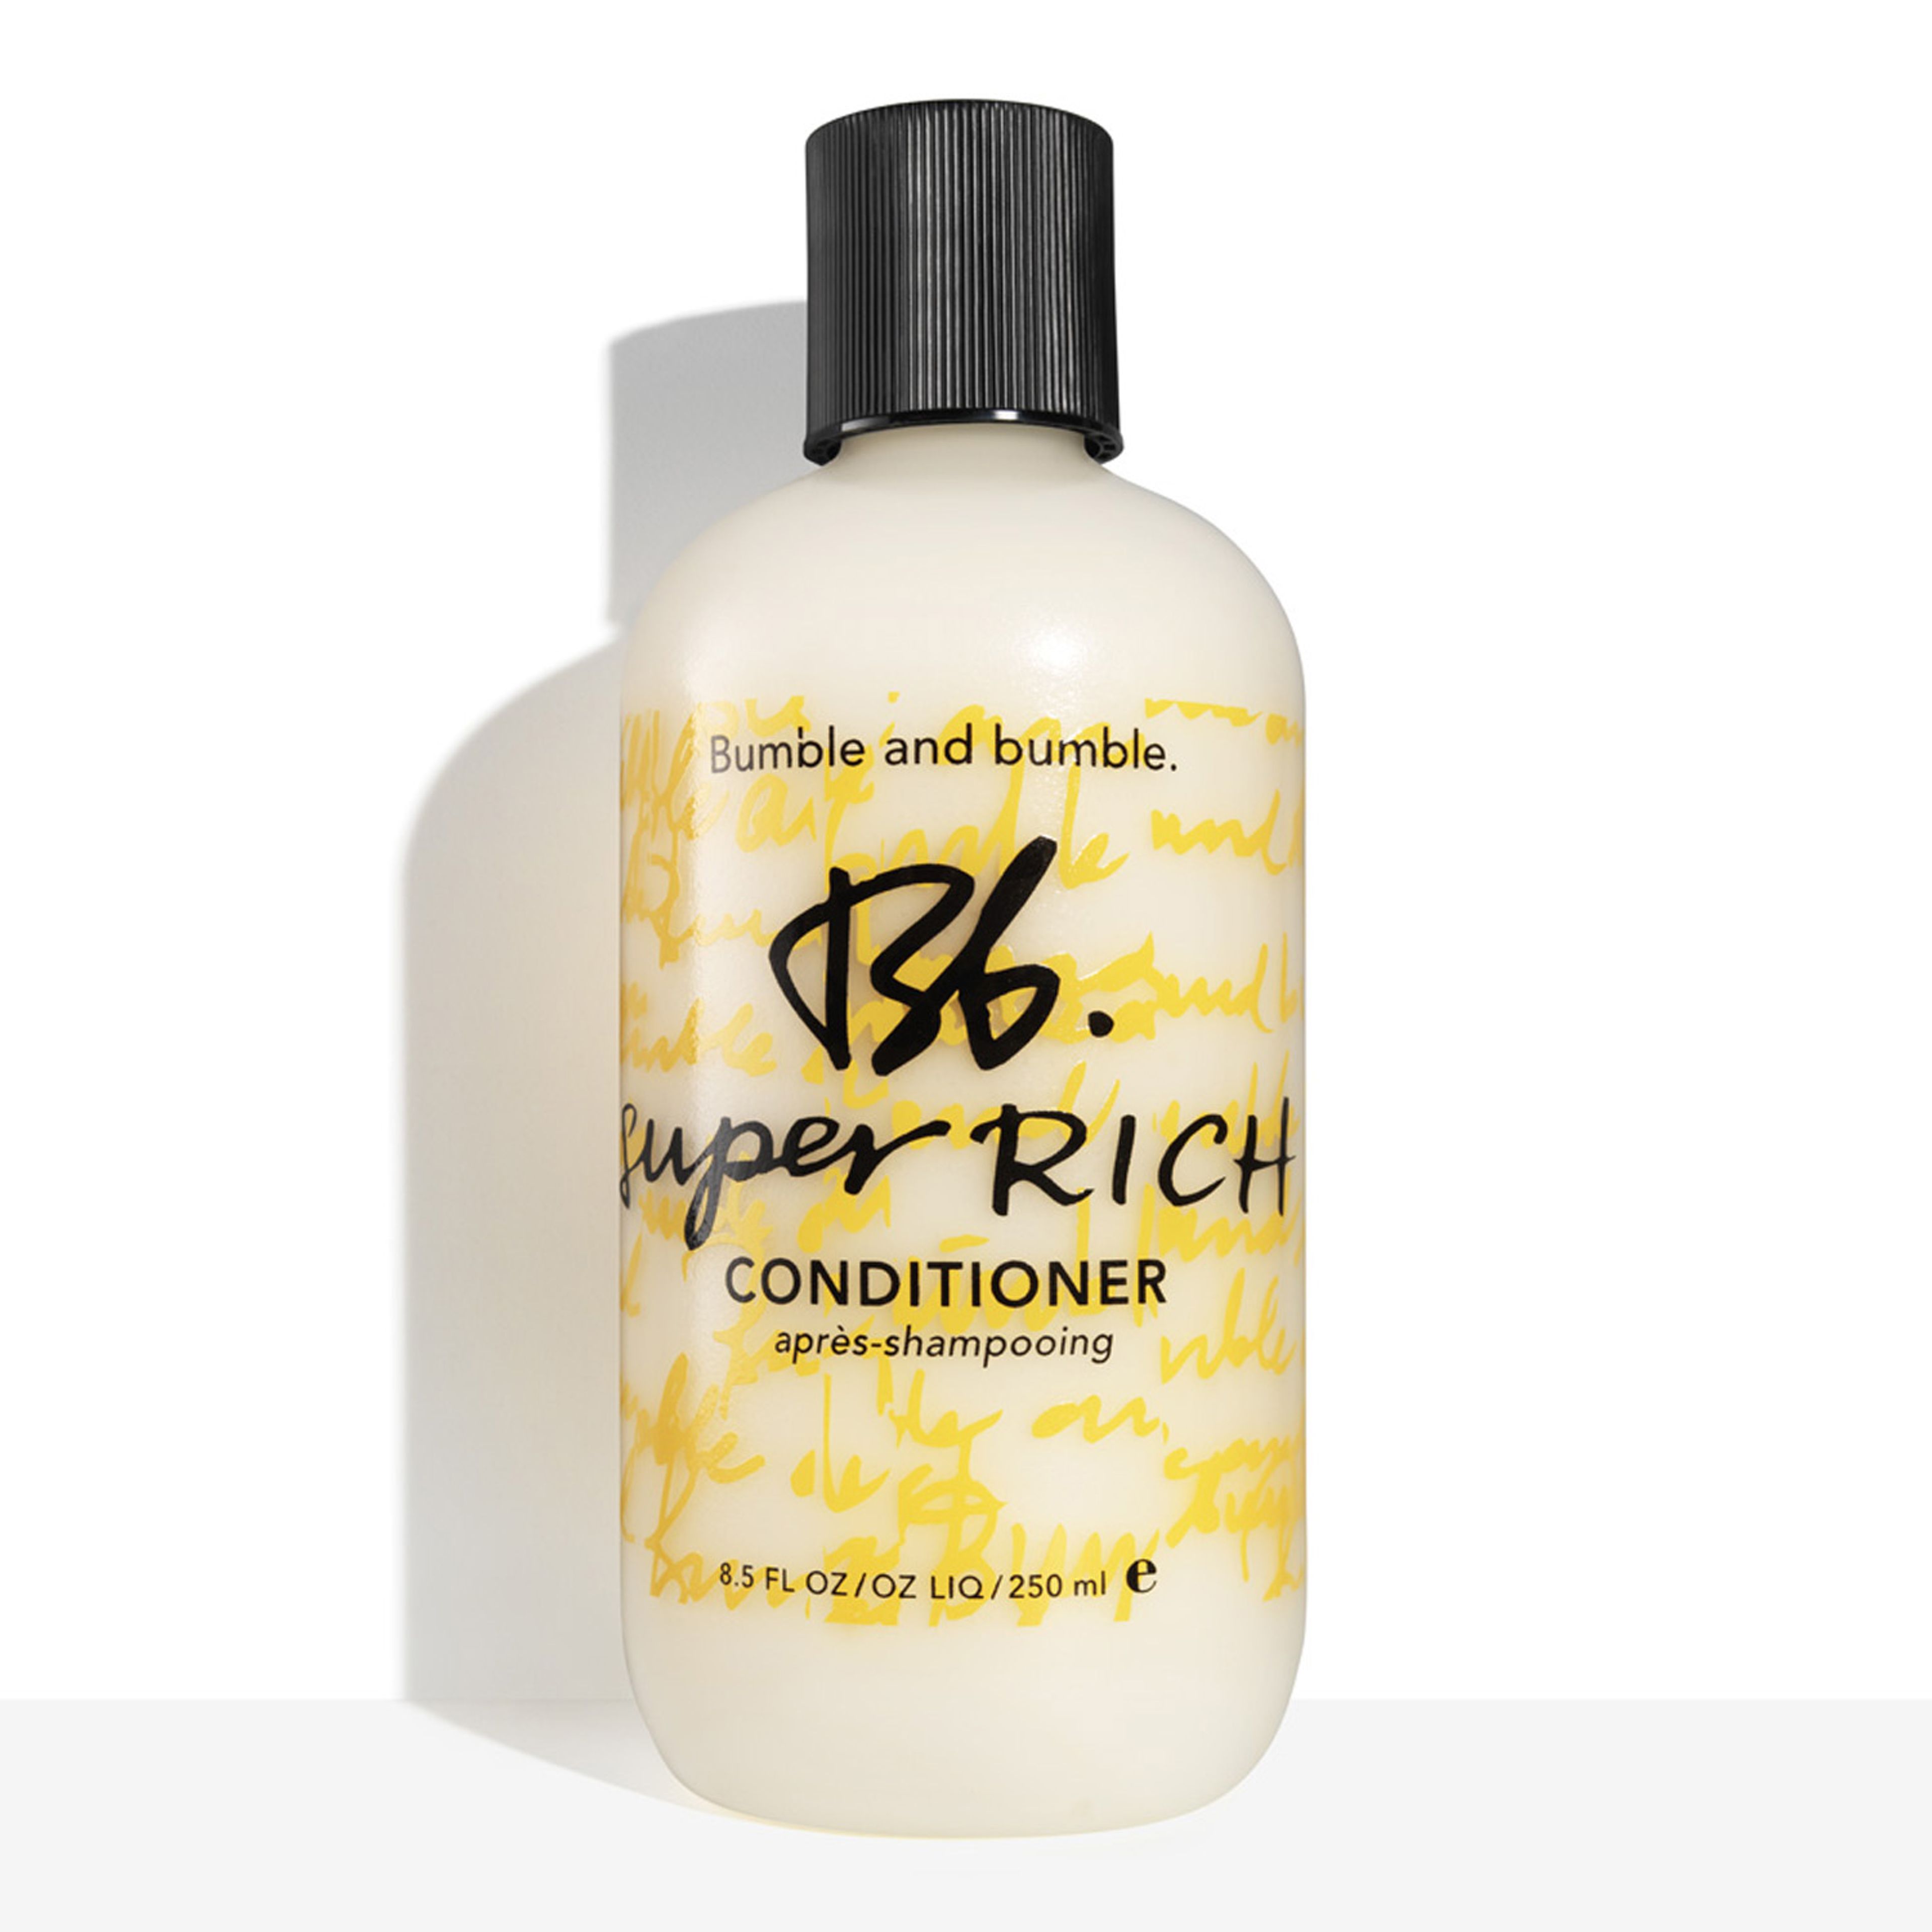 Bumble and bumble Super Rich Conditioner 1